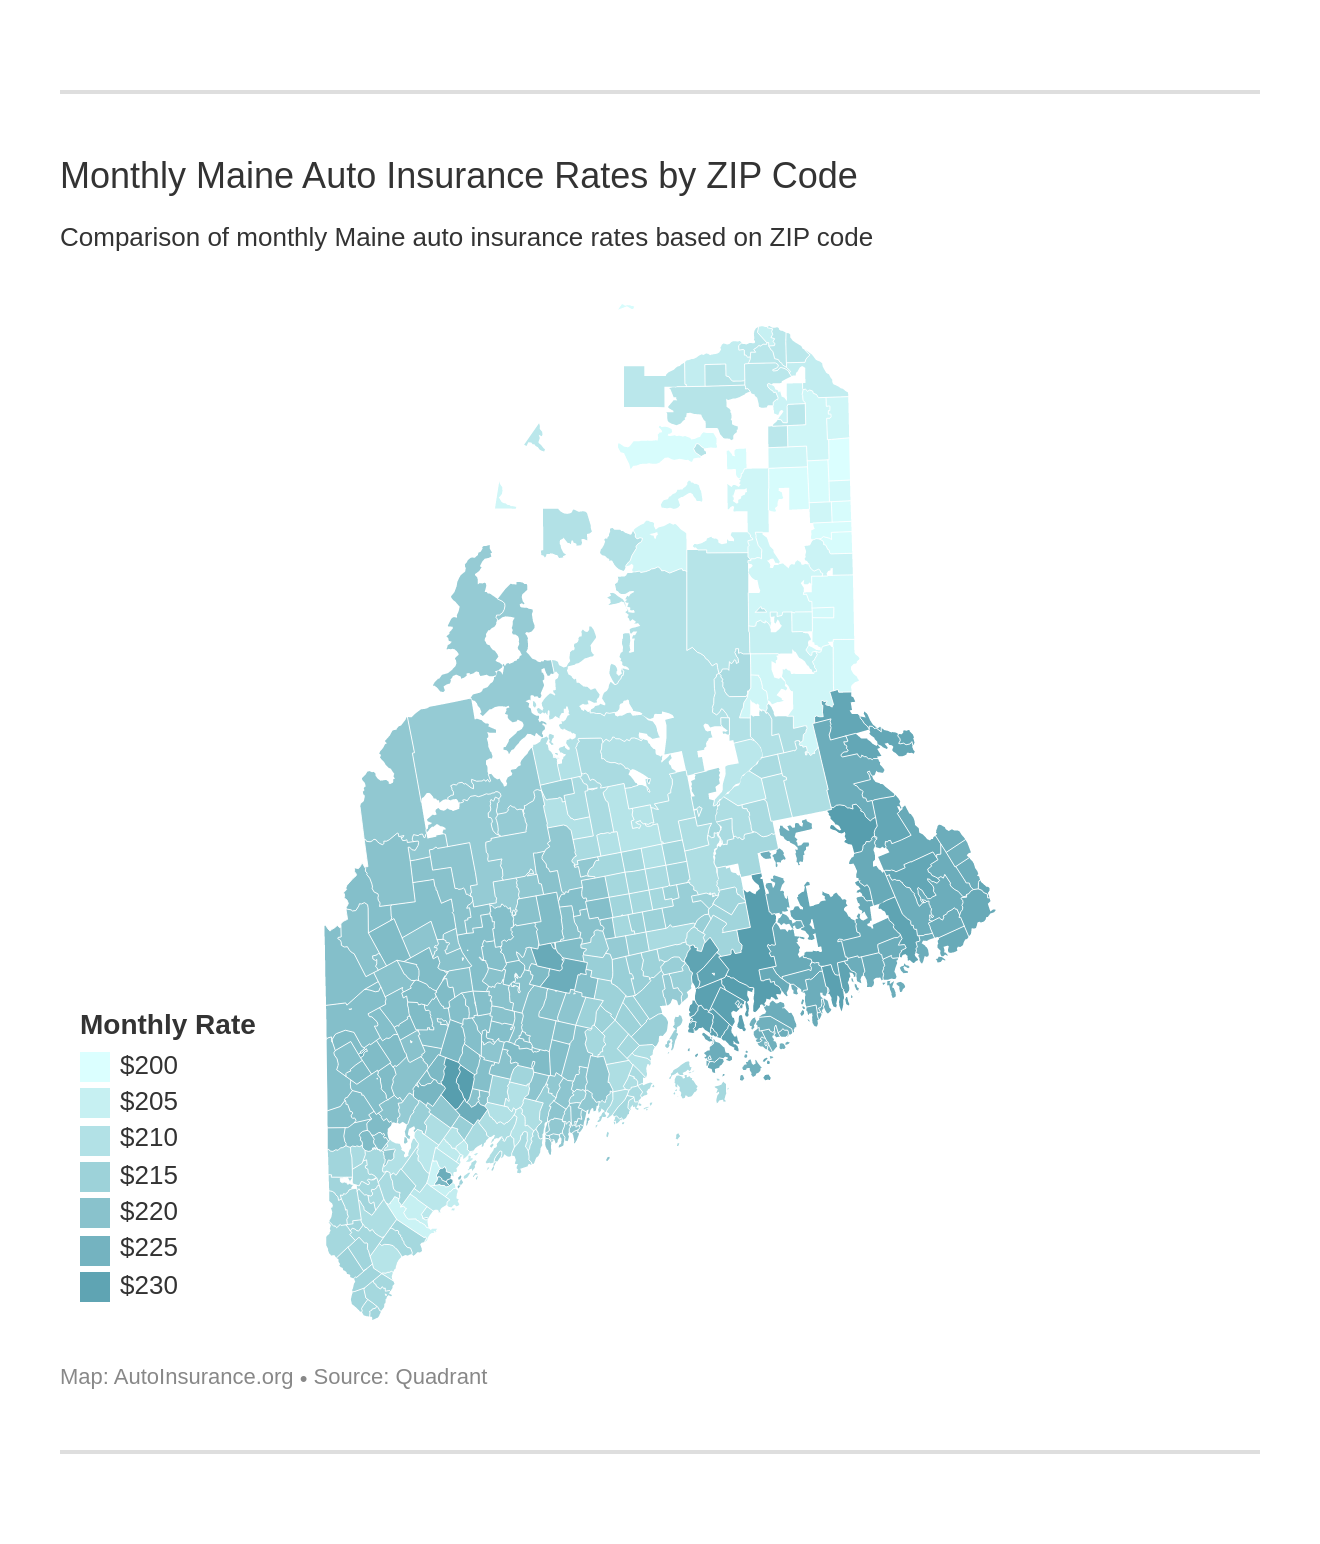 Monthly Maine Auto Insurance Rates by ZIP Code